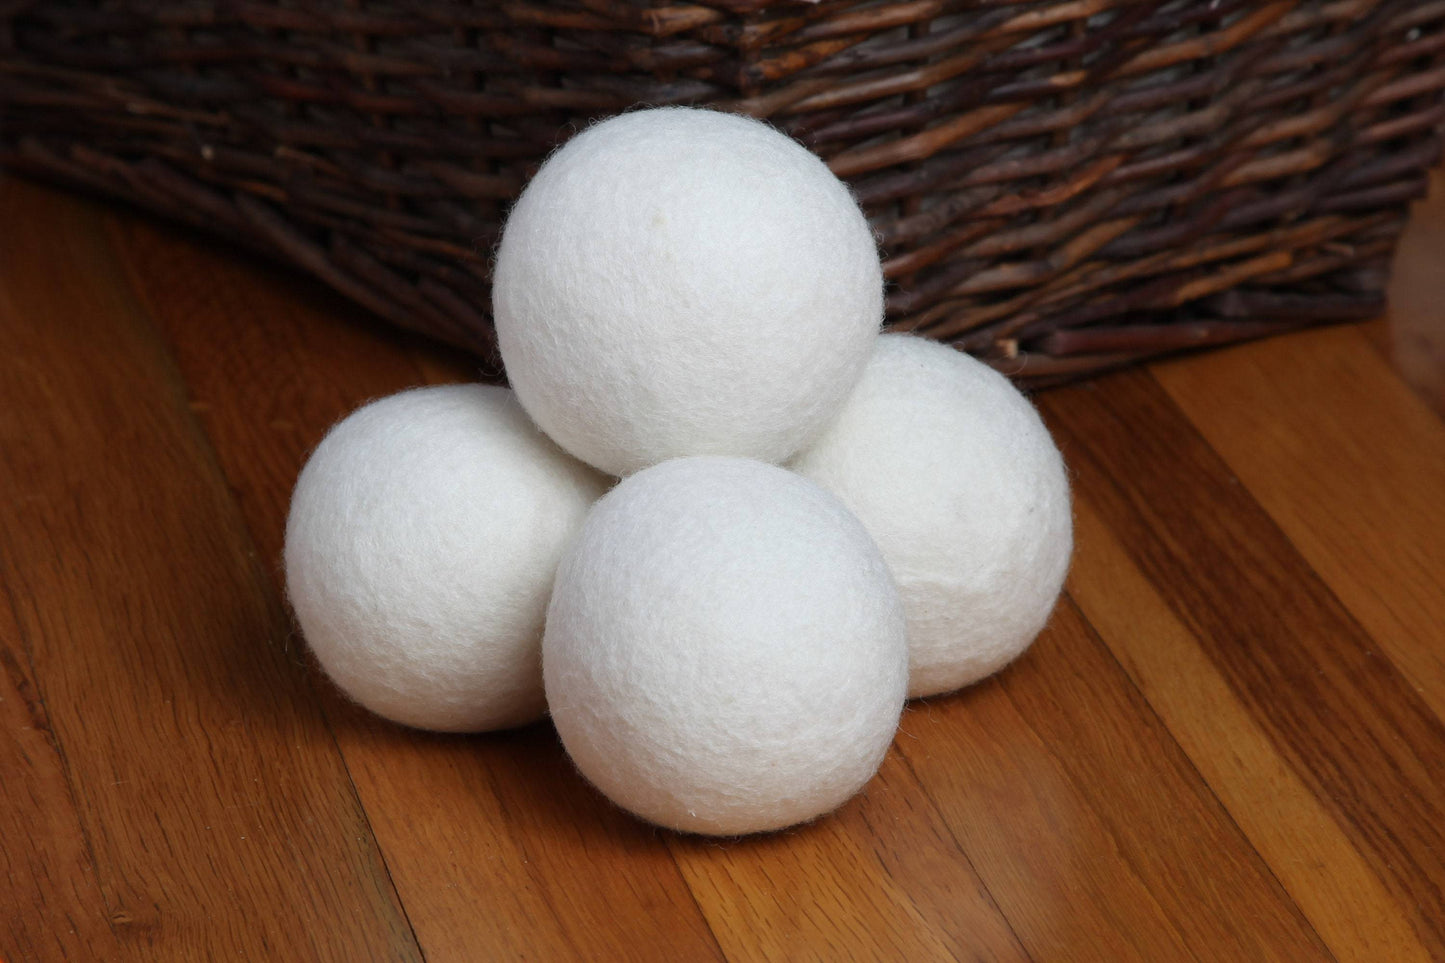 SALE ! Wholesale Co-op Bulk 200 Wool Dryer Balls  Natural Laundry Softener - Gentle on your Laundry, Skin and Wallet